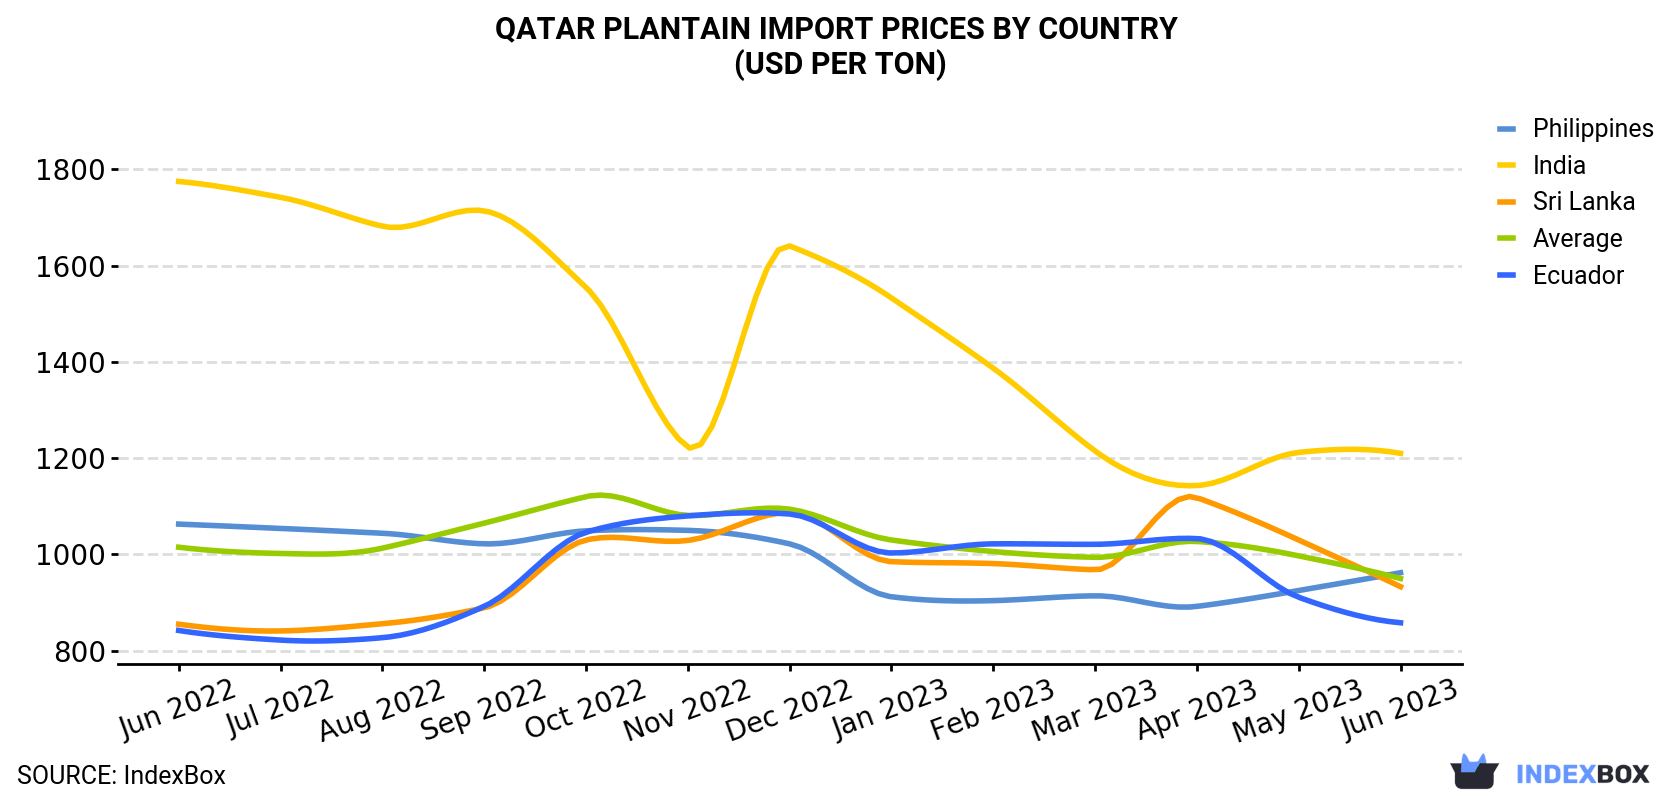 Qatar Plantain Import Prices By Country (USD Per Ton)